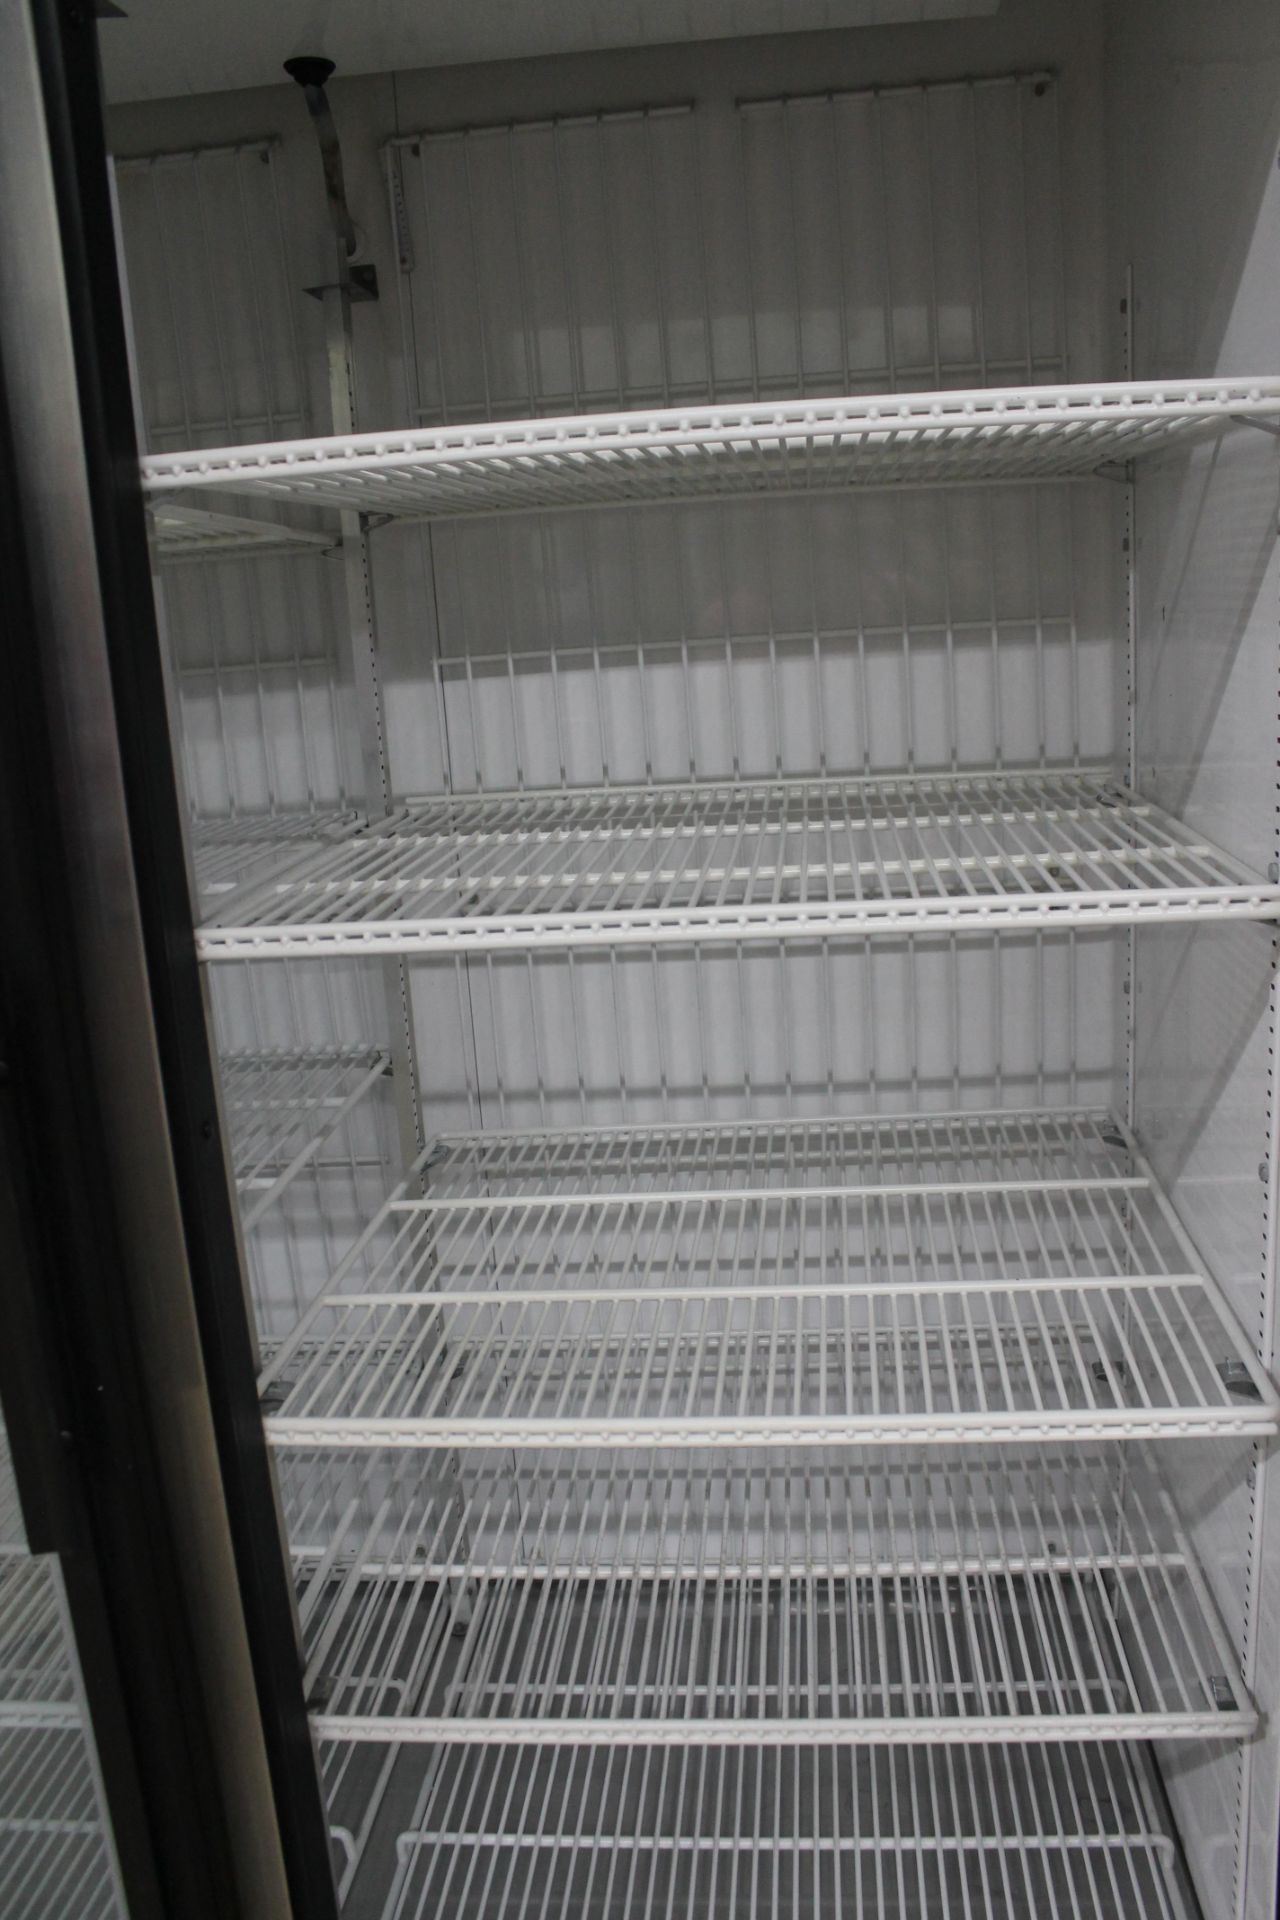 USED SWING 2 DOOR REFRIGERATOR WITH HYDROCARBON REFRIGERANT - Image 5 of 6